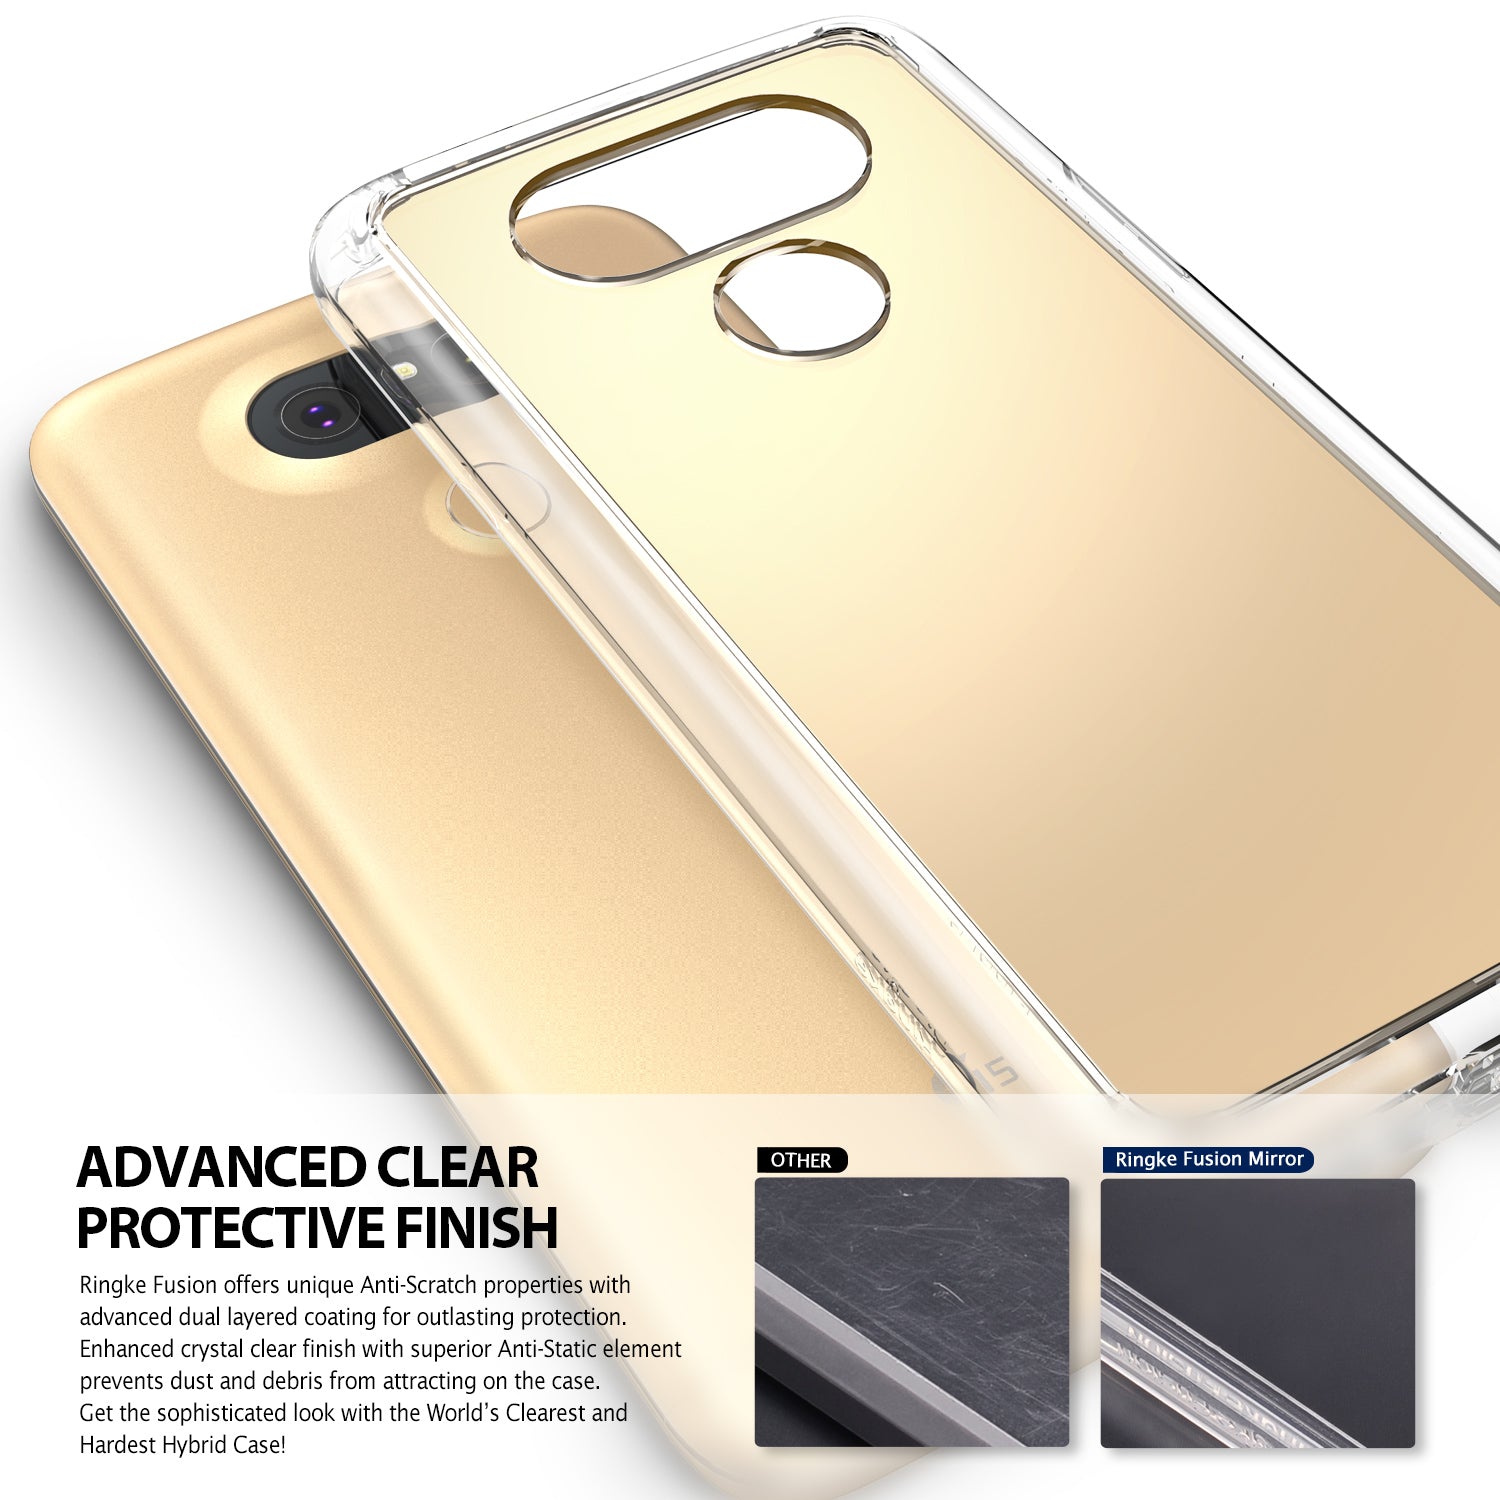 LG G5 | Mirror - Advanced Clear Protective Finish